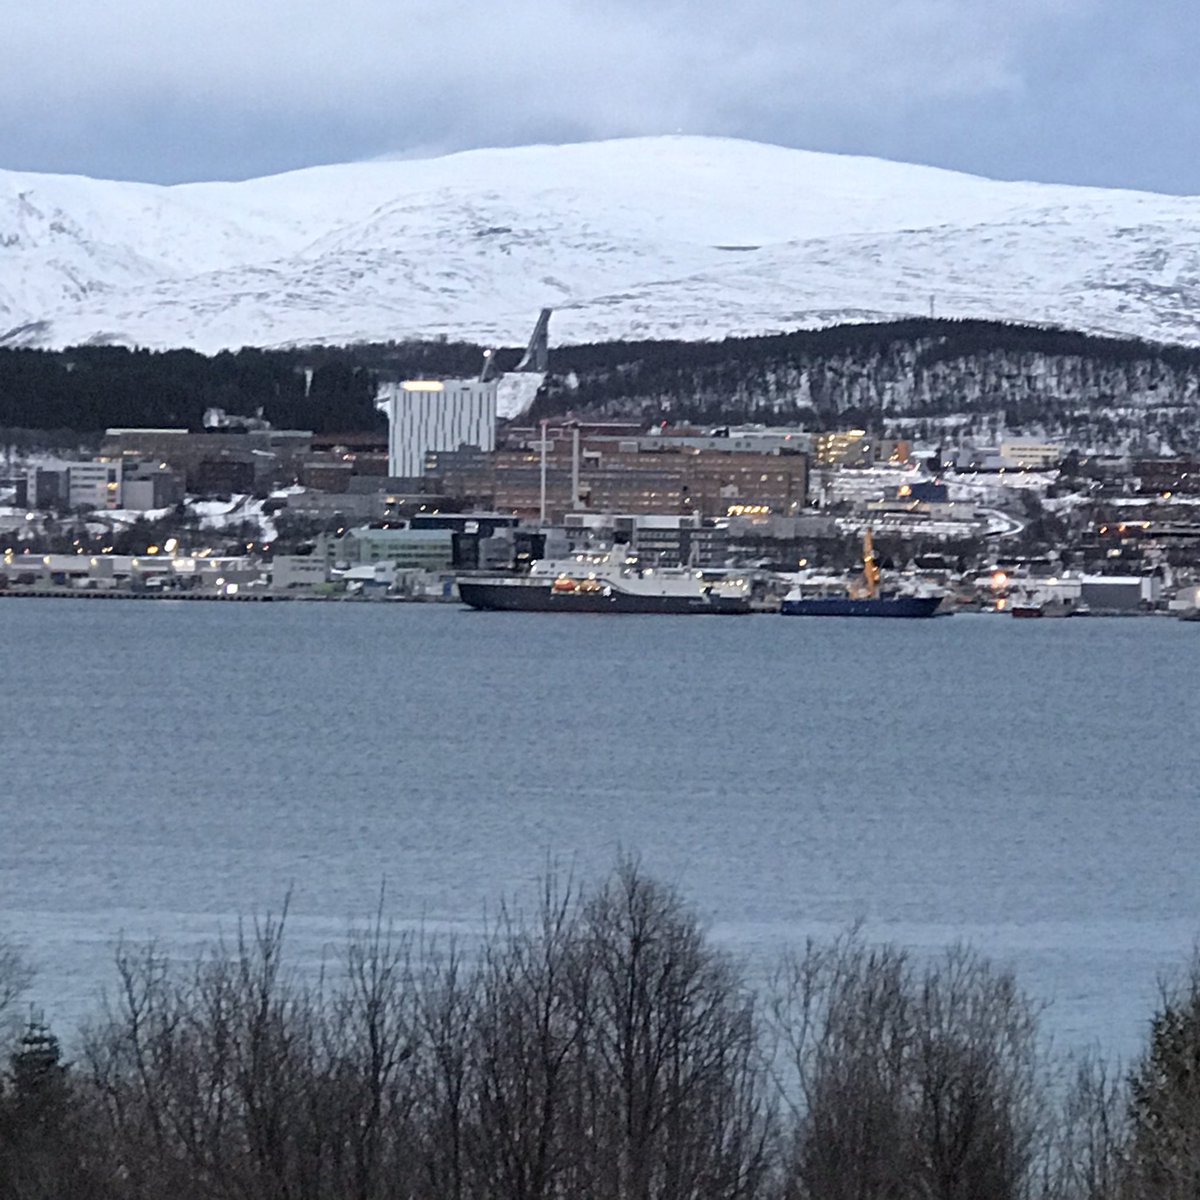 #RVKronprinsHaakon back home in #Tromso after a challenging 2020 cruise year. #COVIDー19 Thankful for successful #FramStraitNPI and other 🇳🇴 #Arctic cruises during Fall. #FFKronprinsHaakon @UiTromso @CAGE_COE @nansenlegacy @NorskPolar